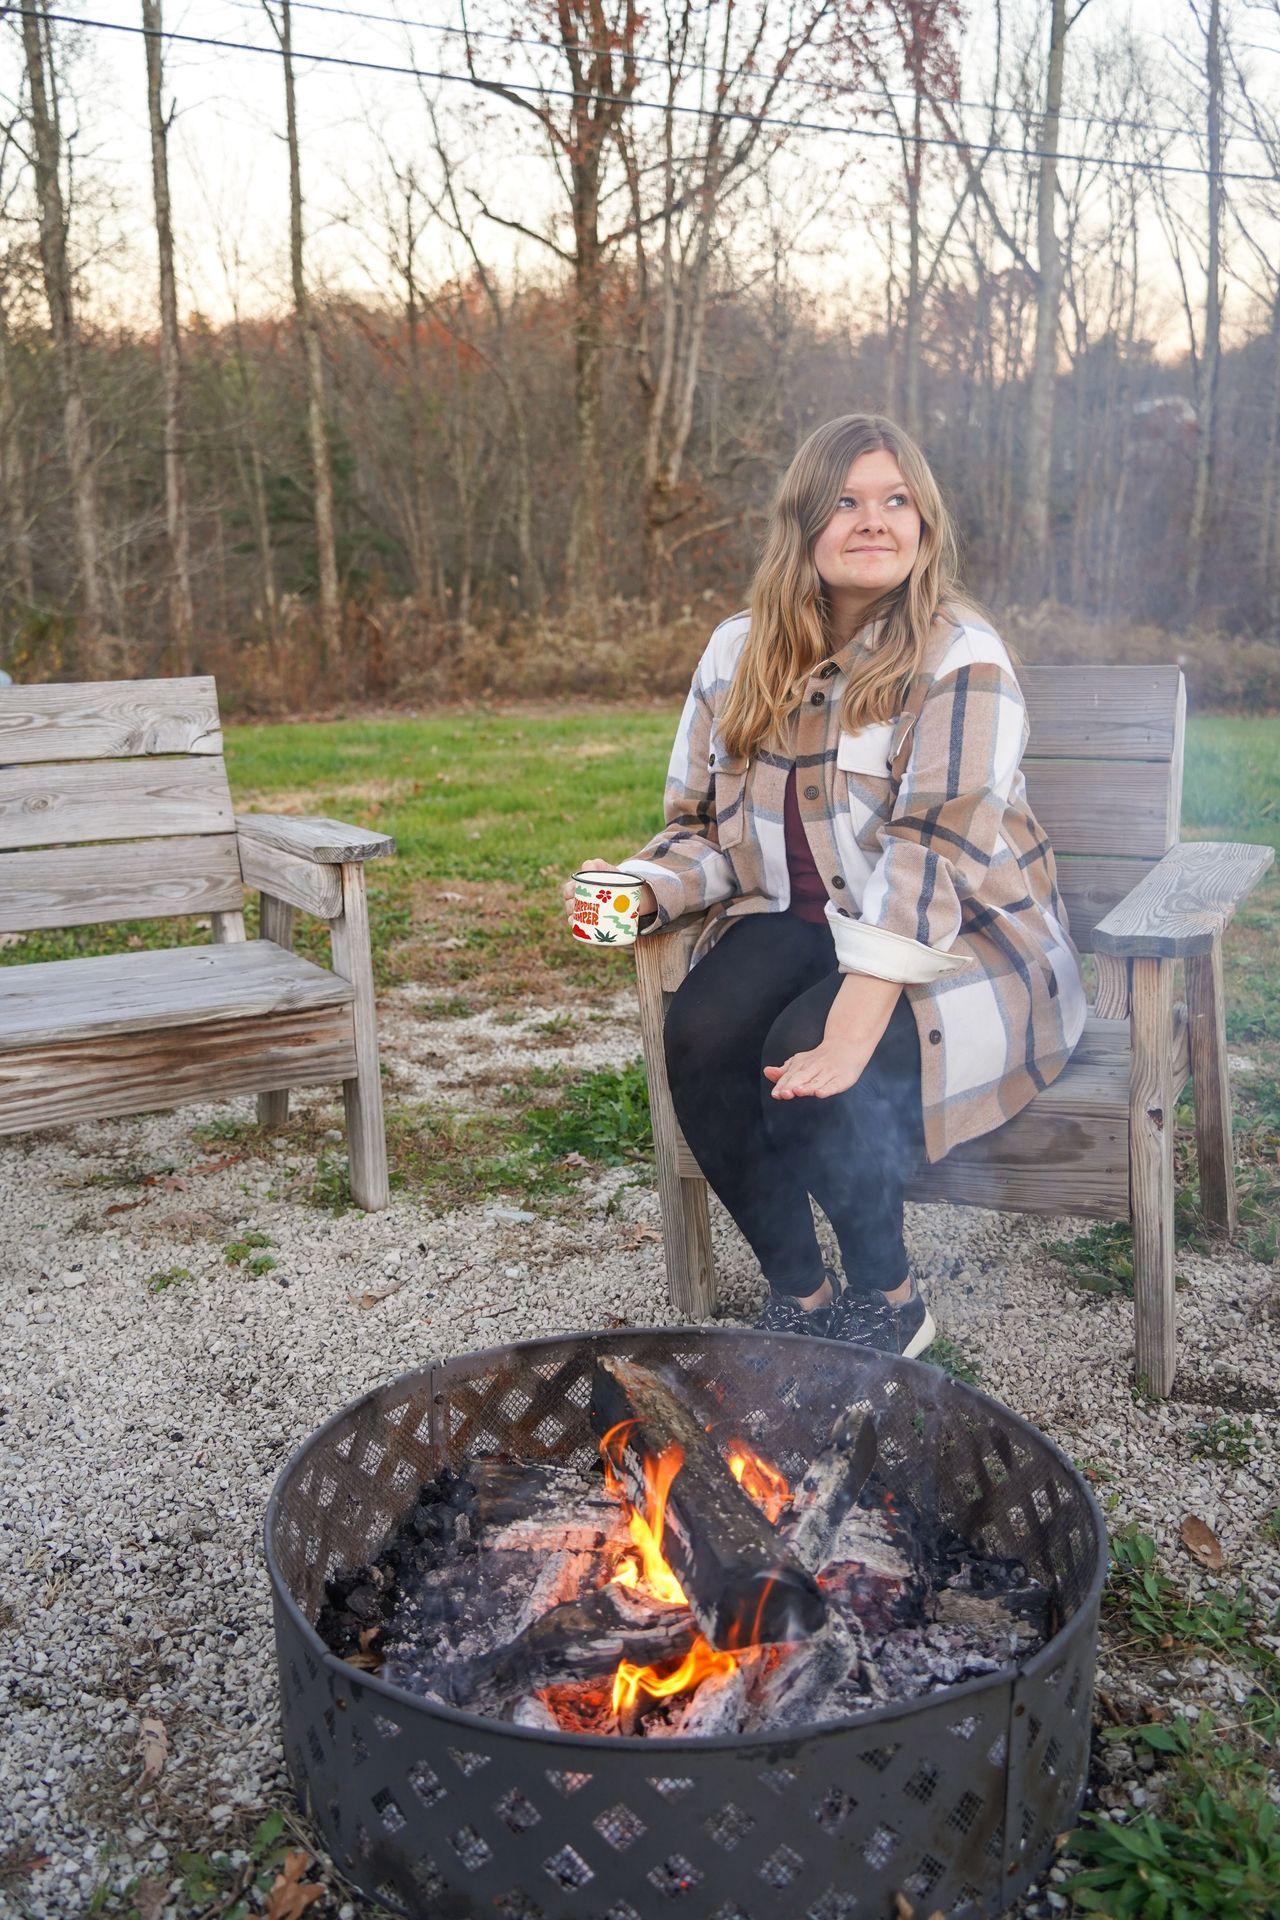 Lydia sitting next to a campfire and warming her hands while holding a mug.